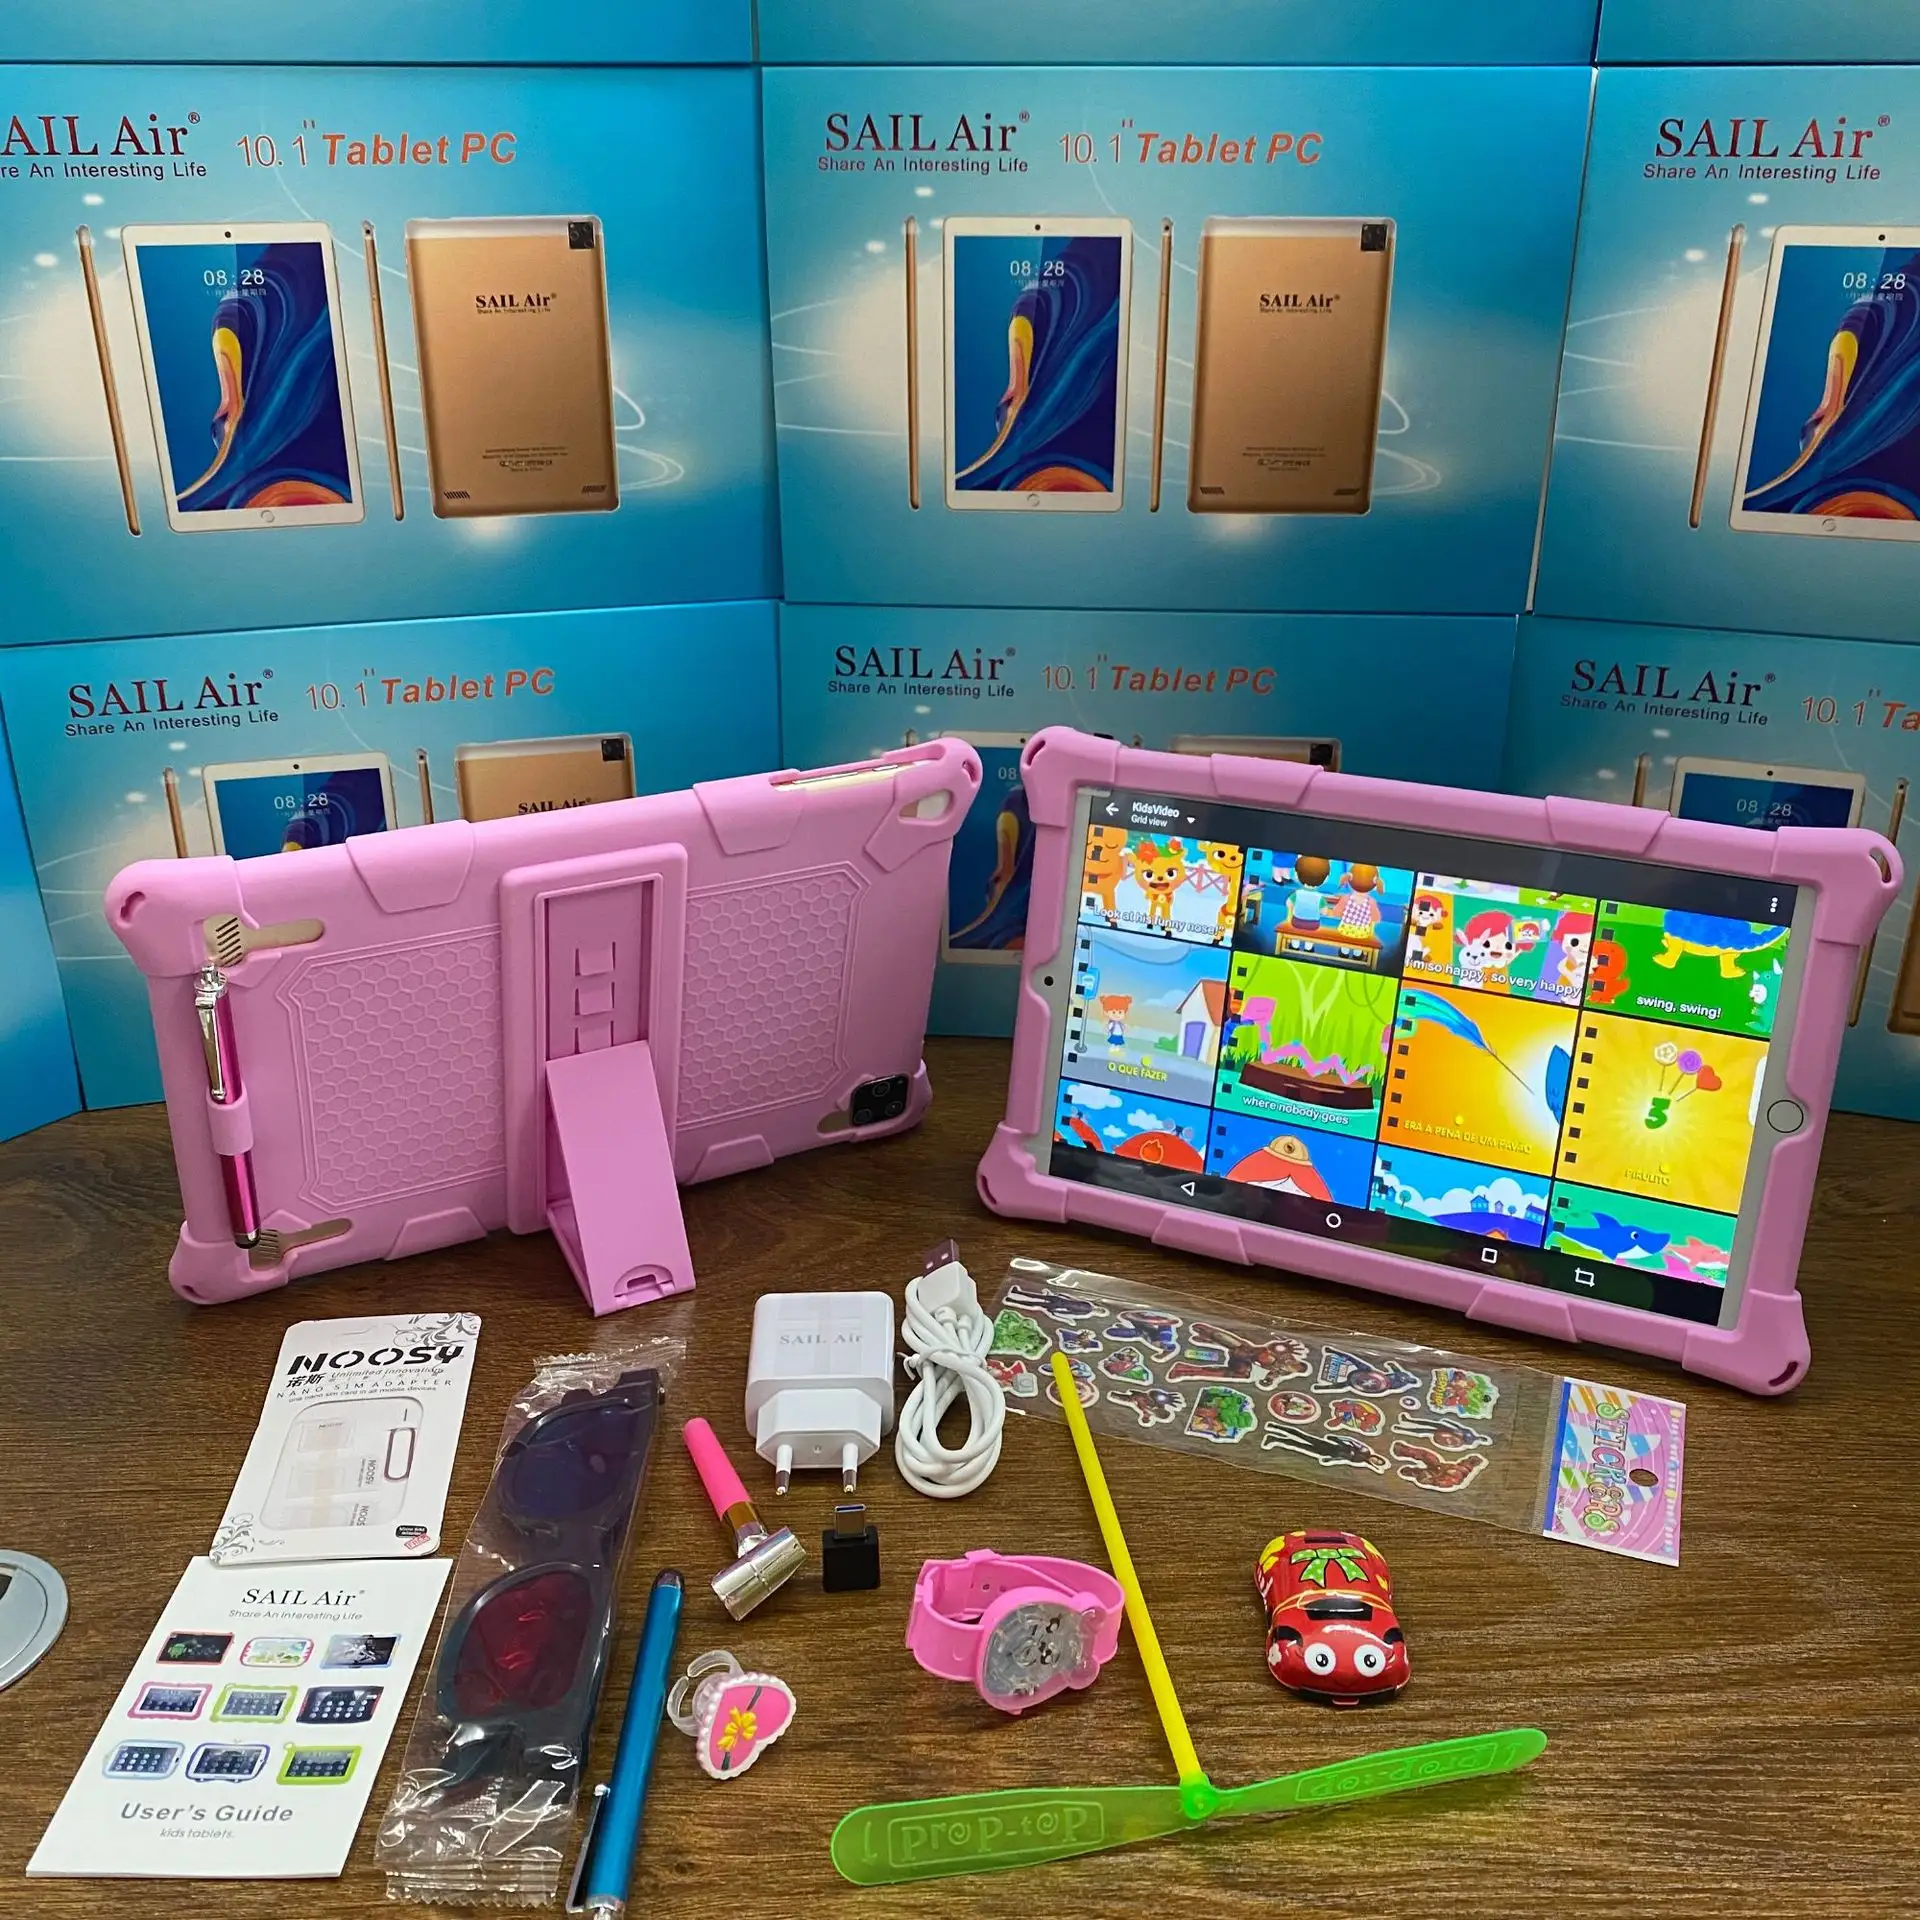 The SAIL Air 107 computer, the world's best-selling tablet, launches a commercial tablet for children with a holster